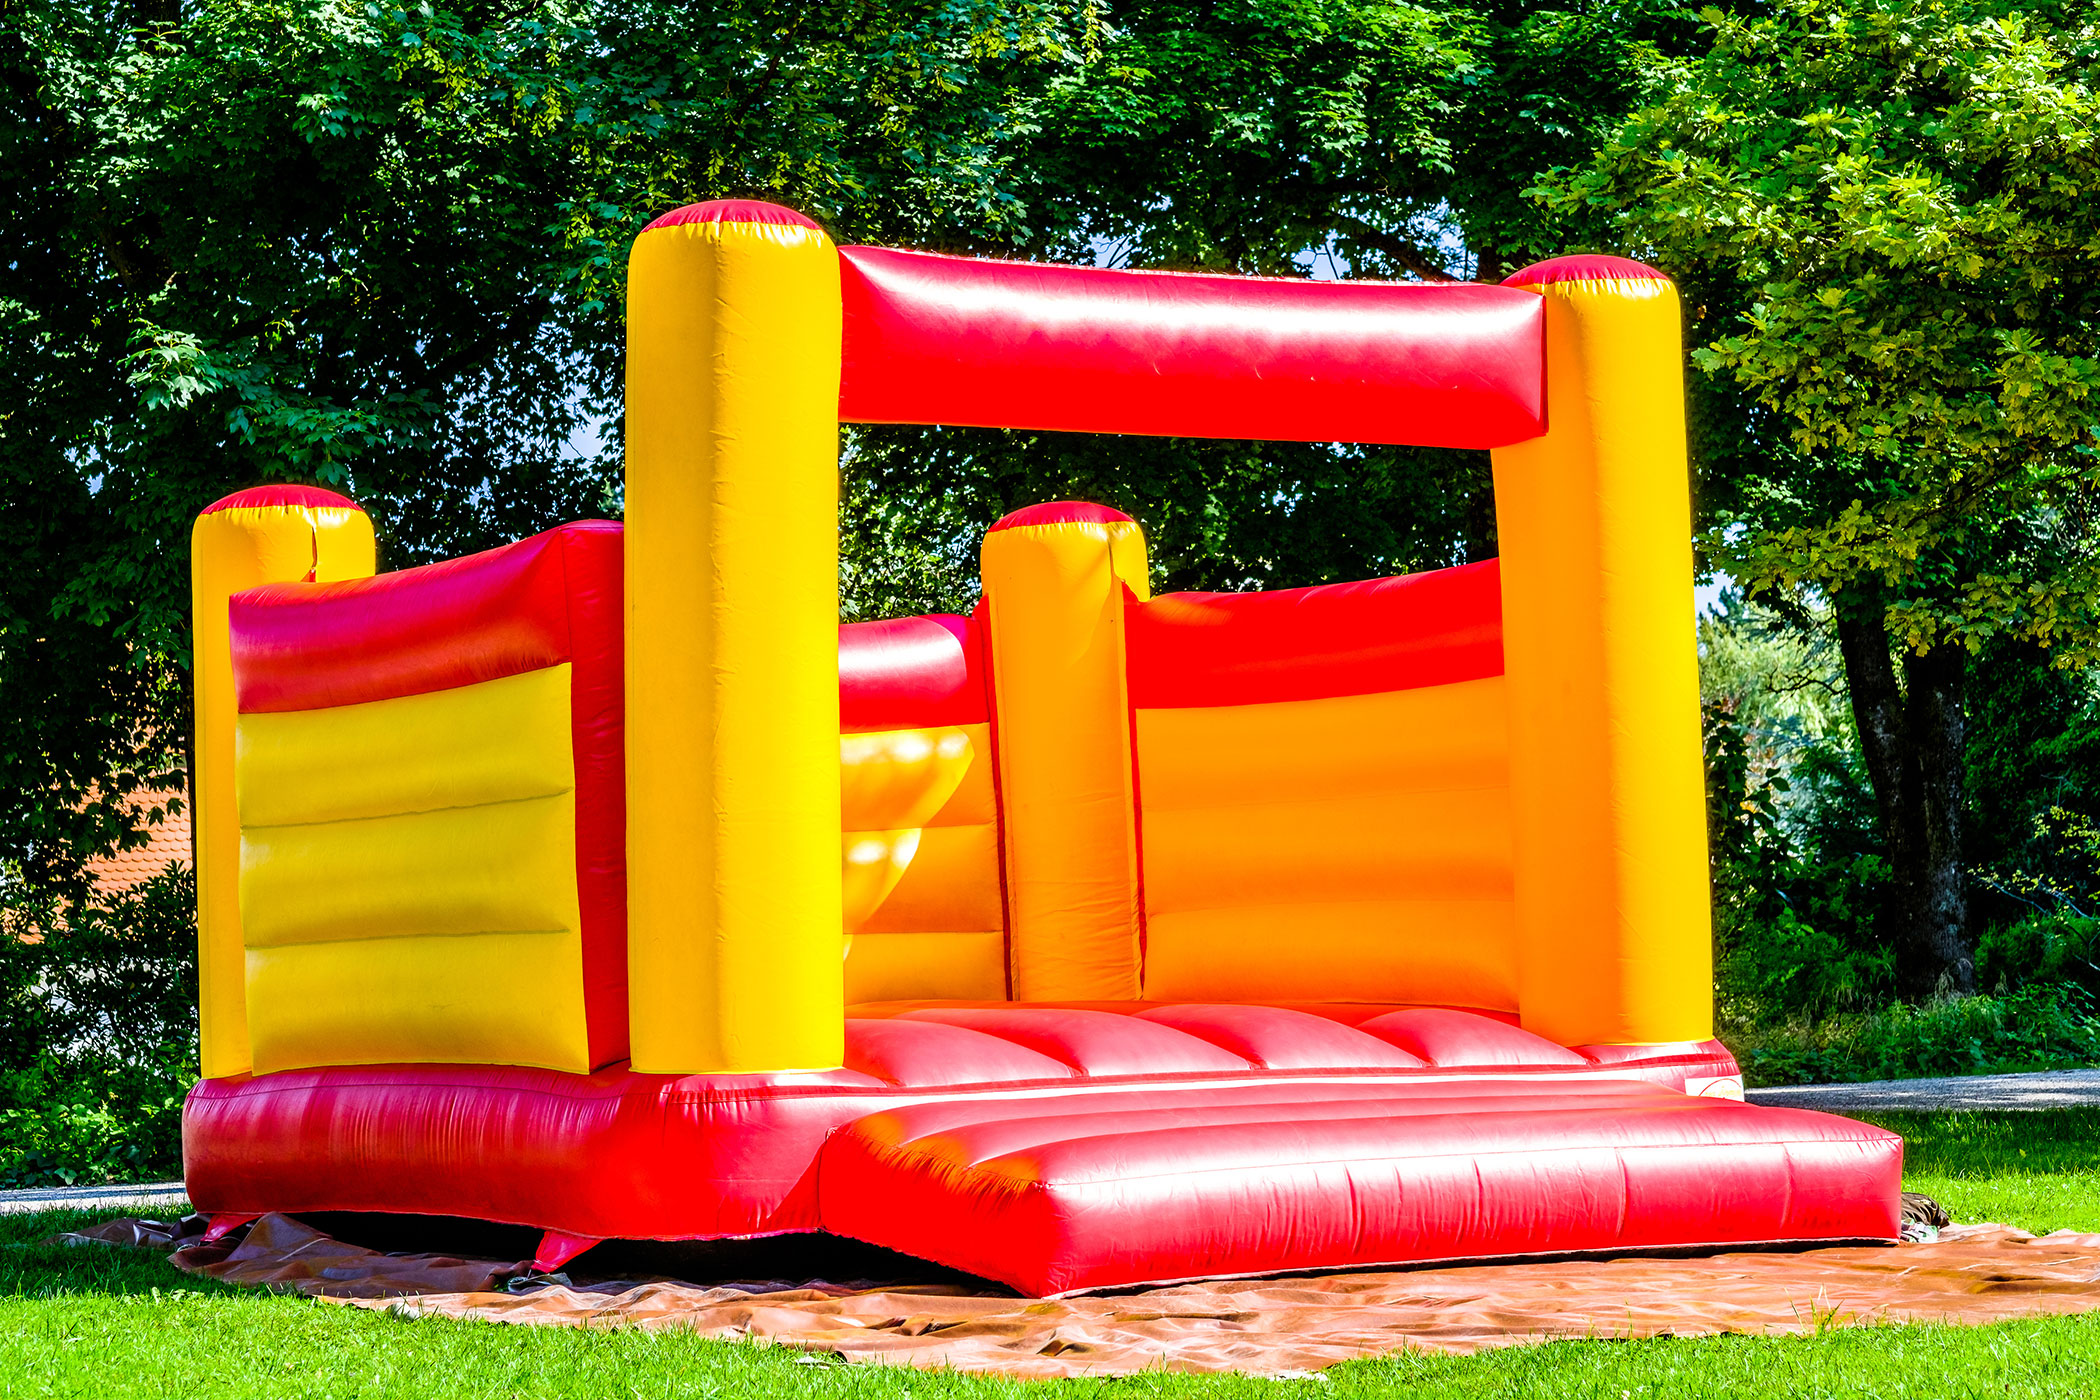 Wind has caused 479 injuries, 28 deaths in bounce houses since 2000